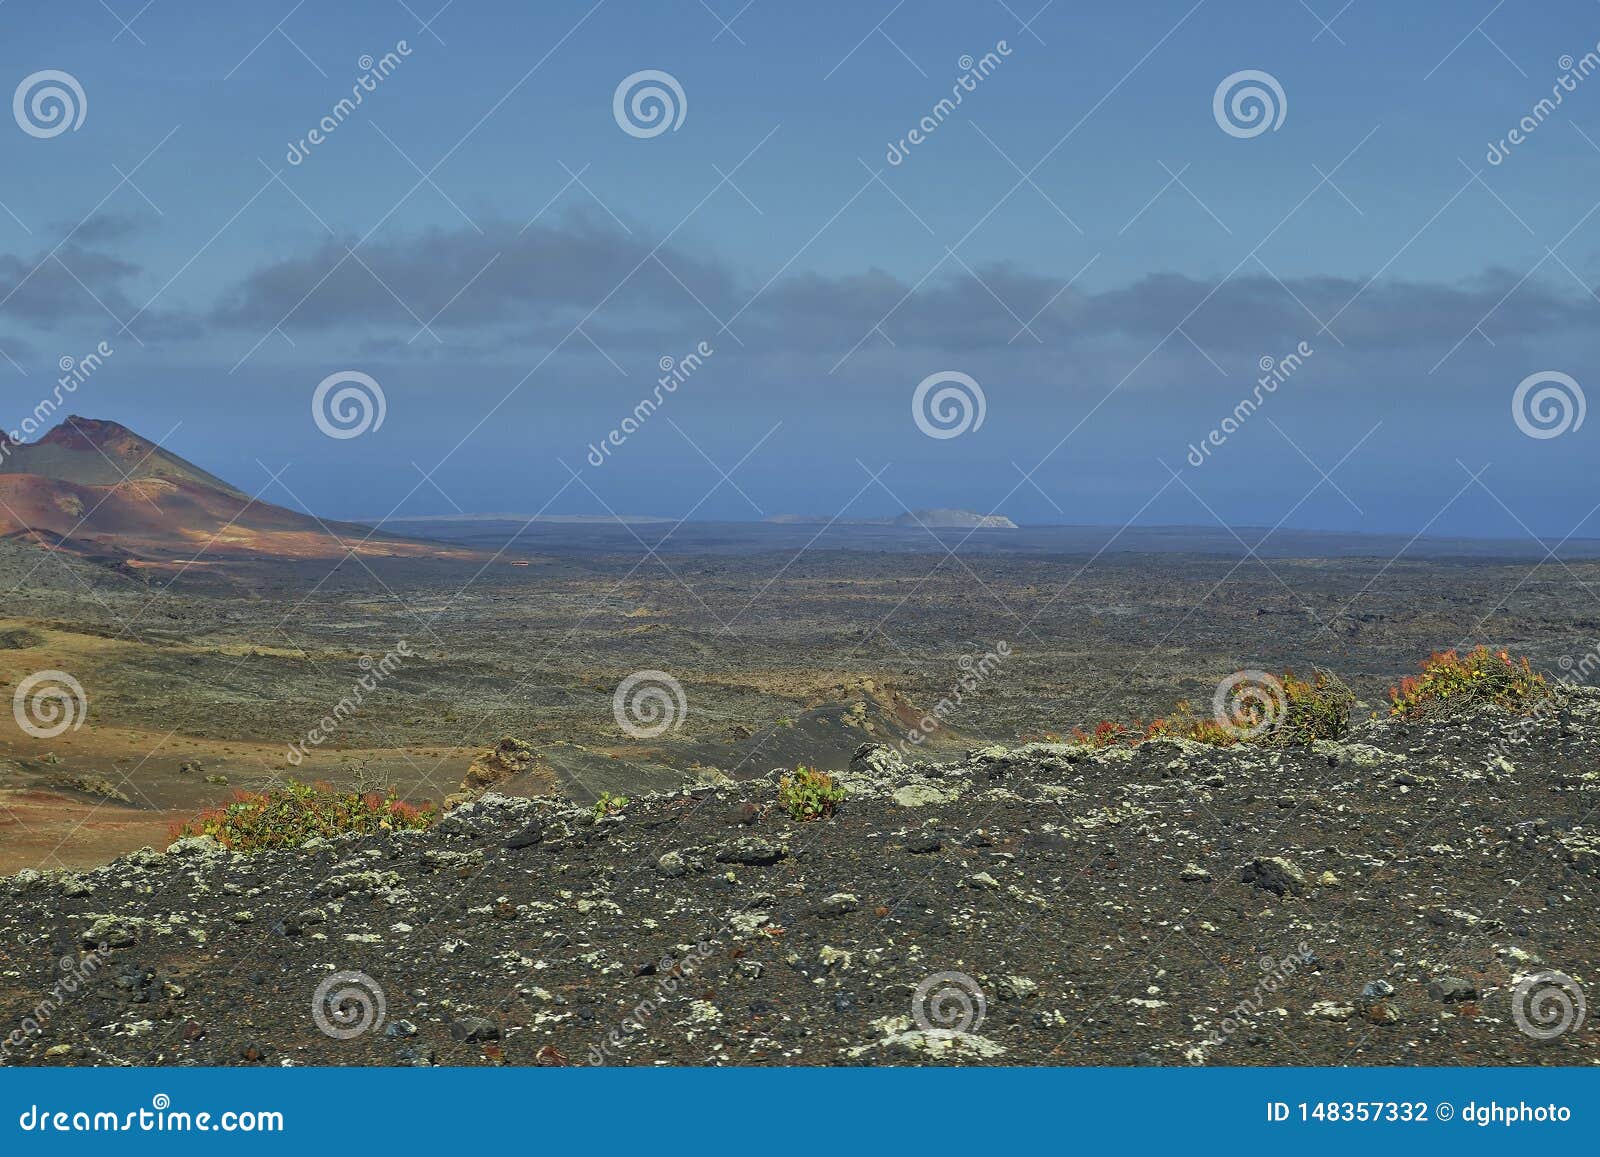 scenic landscape ovolcanic landscape at timanfaya national park on lanzarote islandn the island of lanzarote in the atlantic ocean